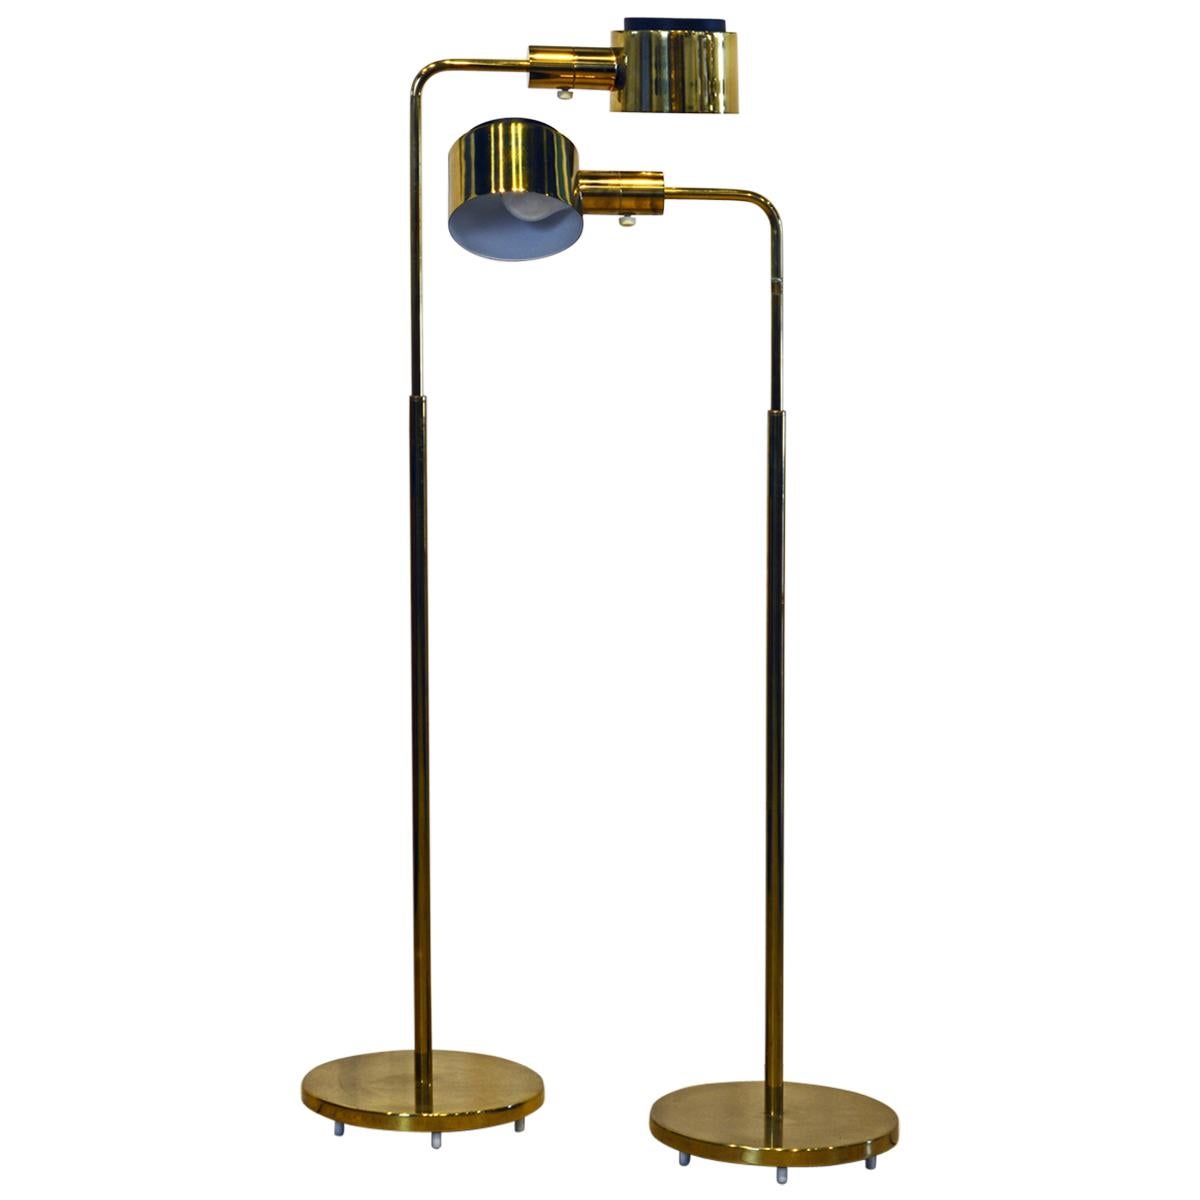 Pair of Vintage Adjustable Brass Floor Lamps by Jon Norman for Casella Lighting